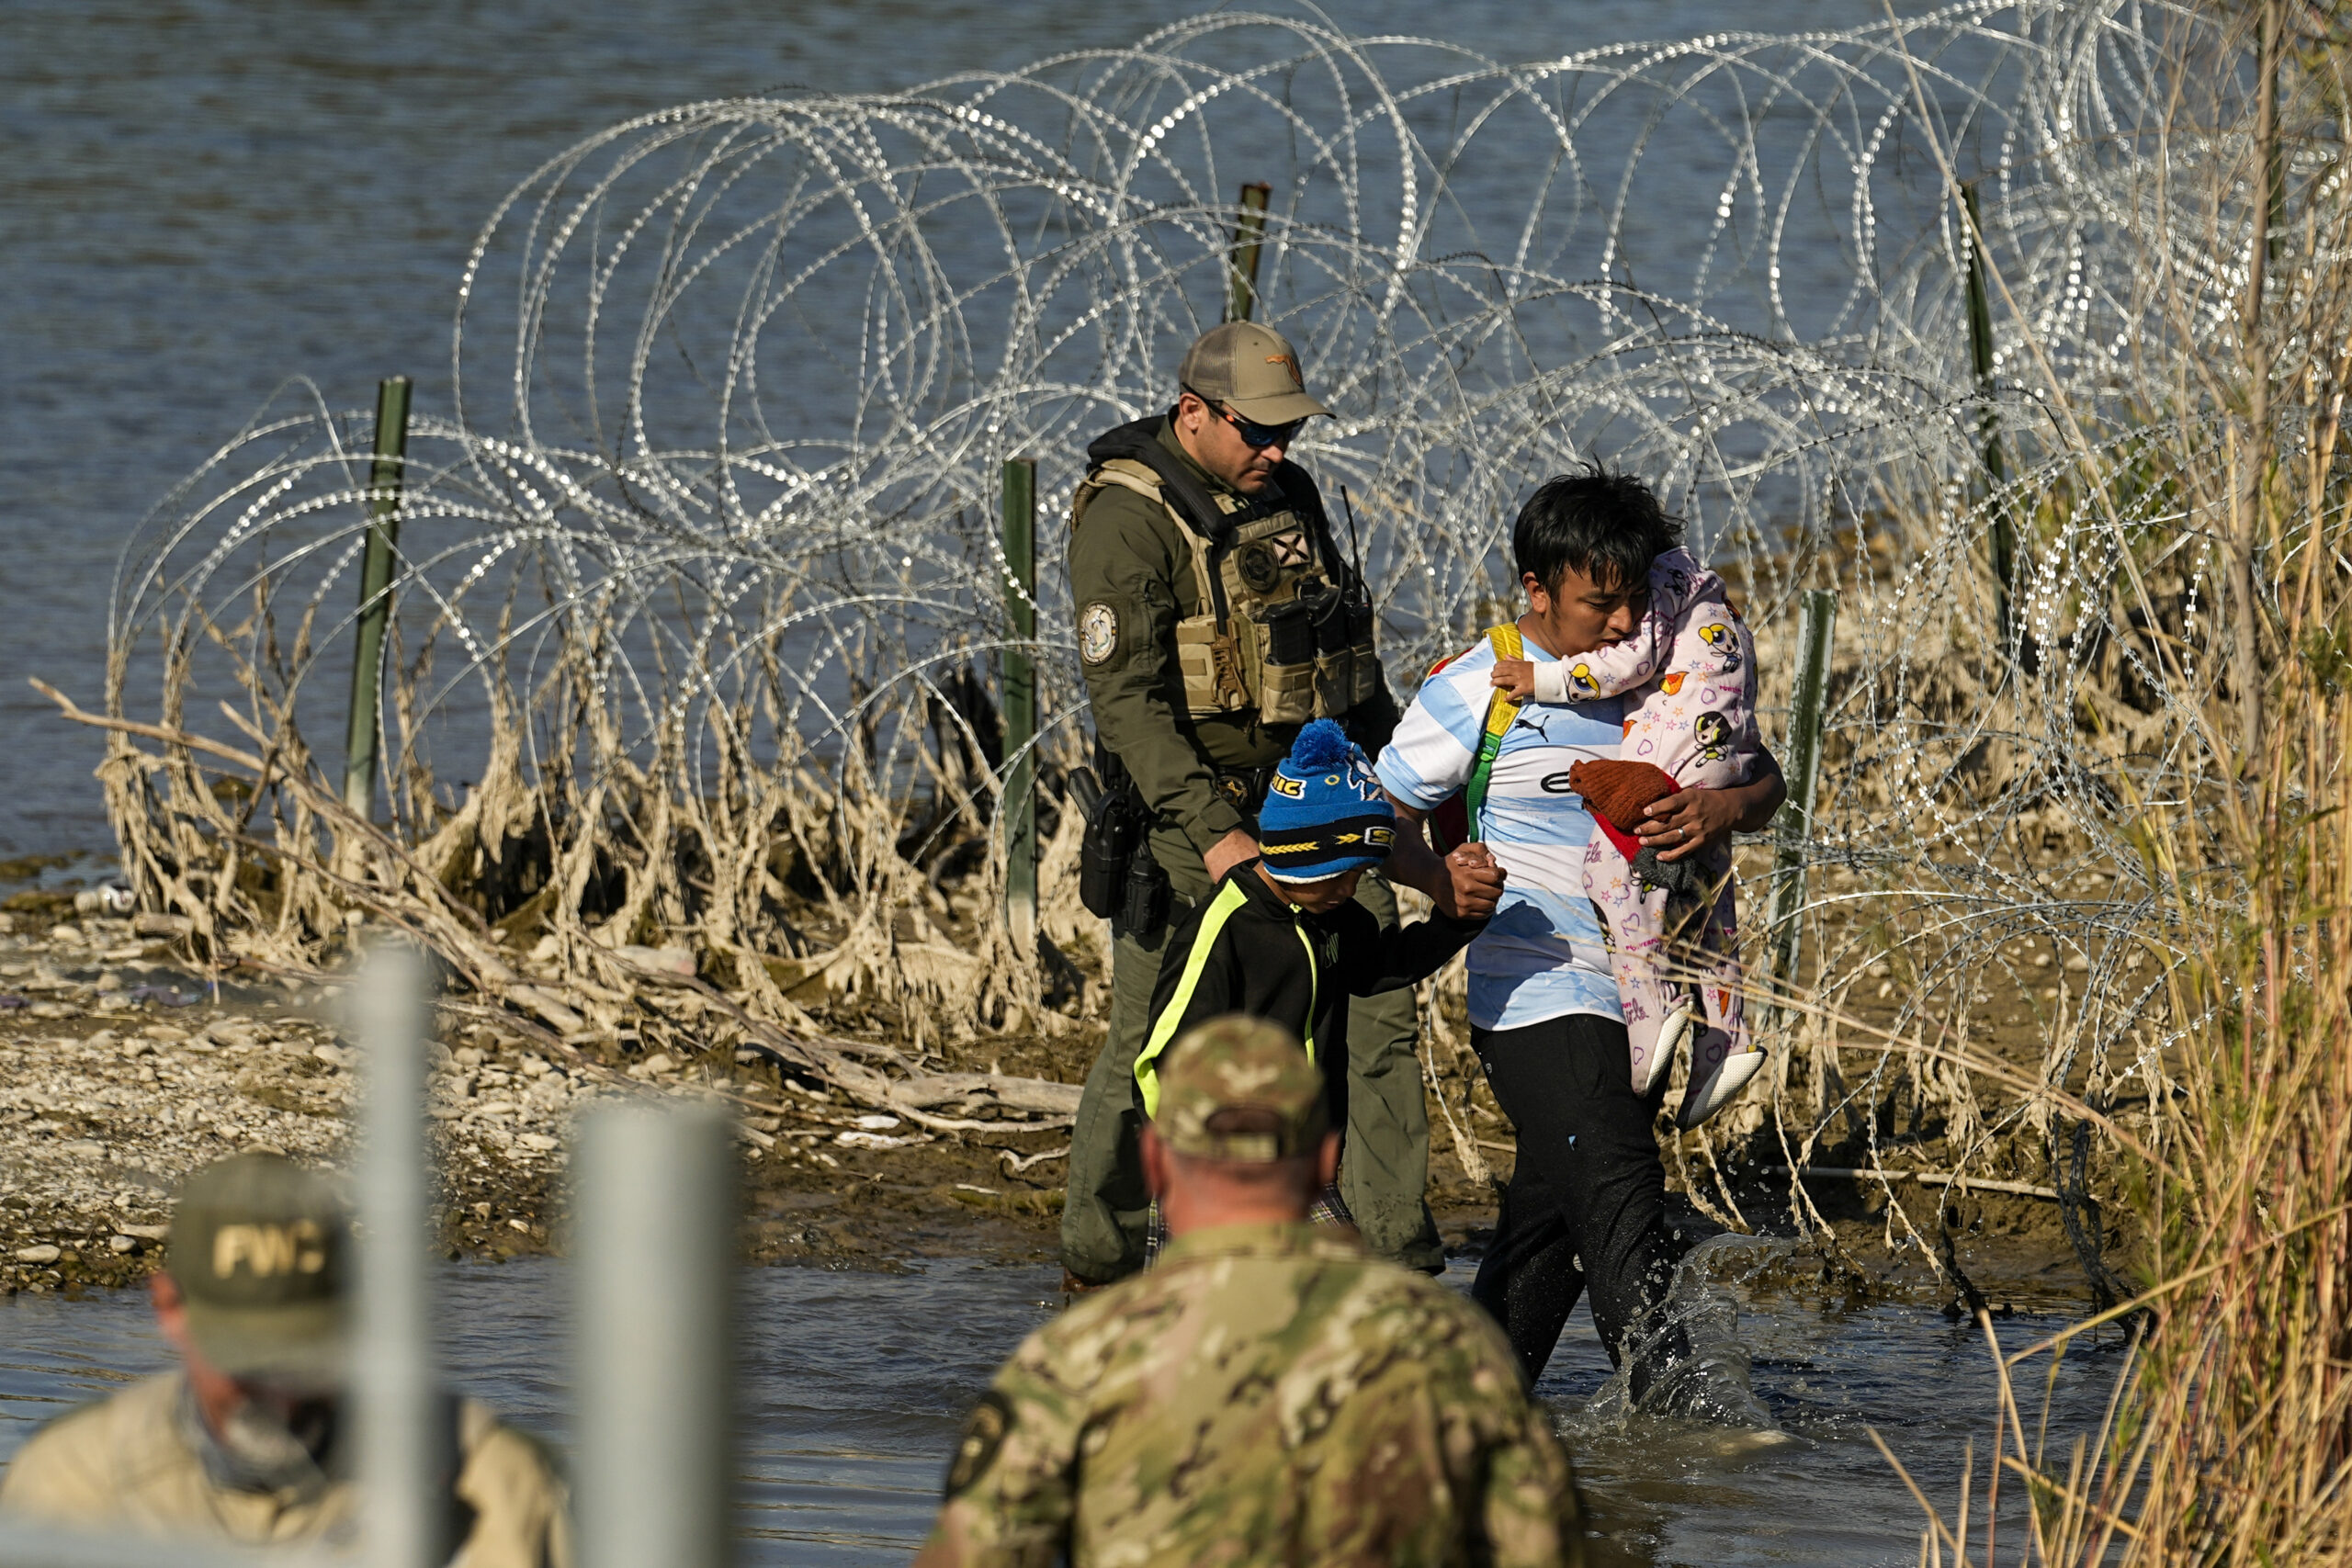 FILE - Migrants are taken into custody by officials at the Texas-Mexico border, Jan. 3, 2024, in Eagle Pass, Texas. The Supreme Court on Tuesday, March 12, 2024 extended a stay on a new Texas law that would empower police to arrest migrants suspected of illegally crossing the U.S.-Mexico border.  The order puts the law on hold until at least Monday while the high court considers a challenge by the Justice Department, which has called the law an unconstitutional overreach. (AP Photo/Eric Gay, file)